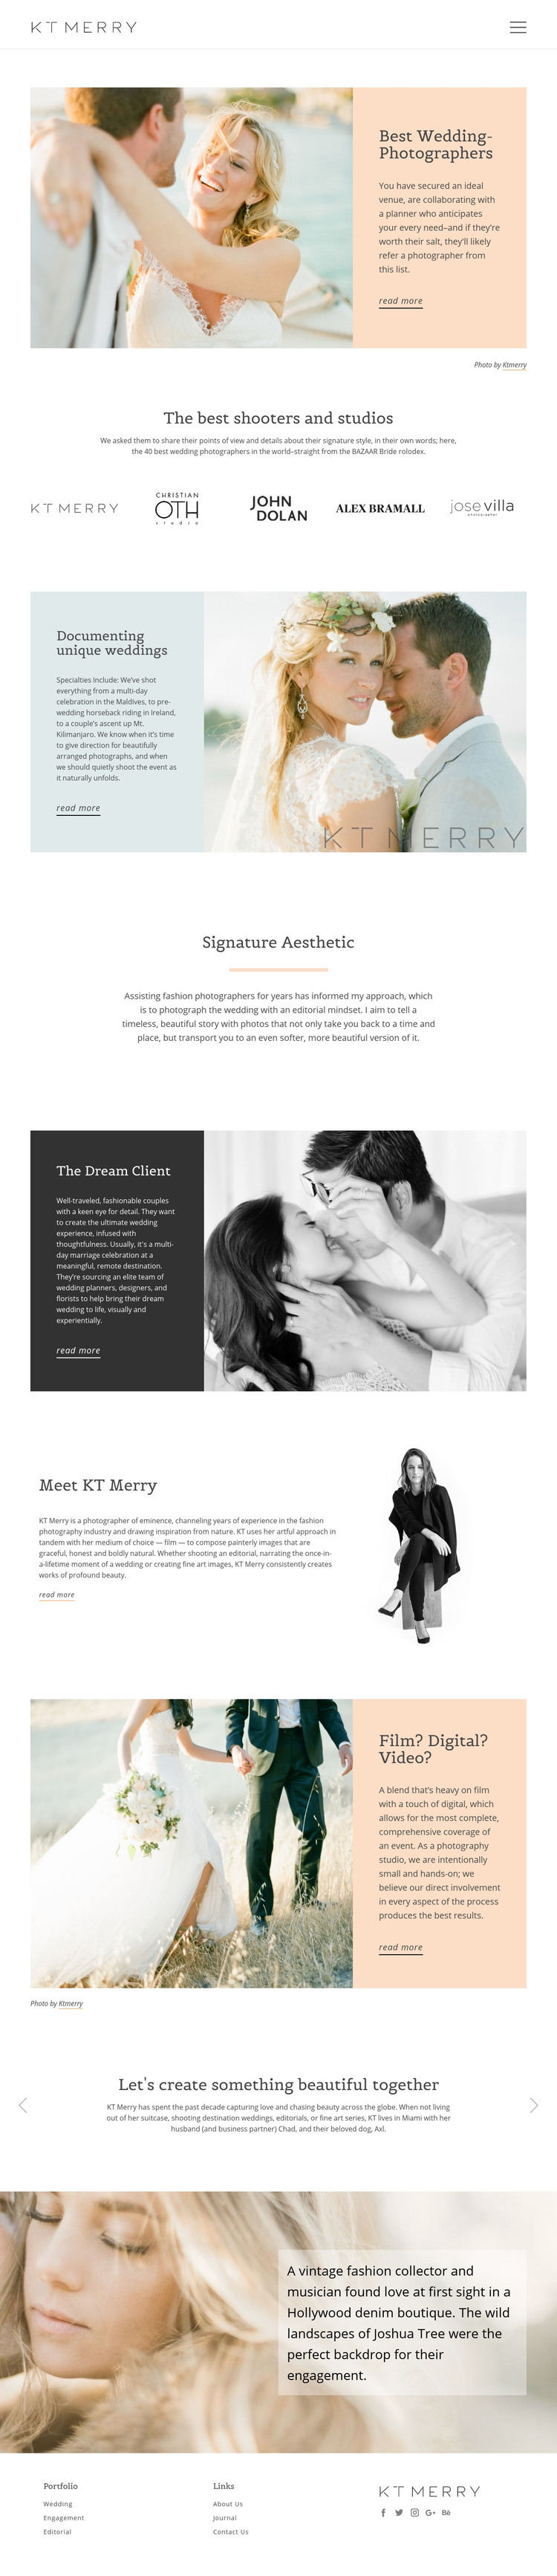 Shooters for special wedding Homepage Design